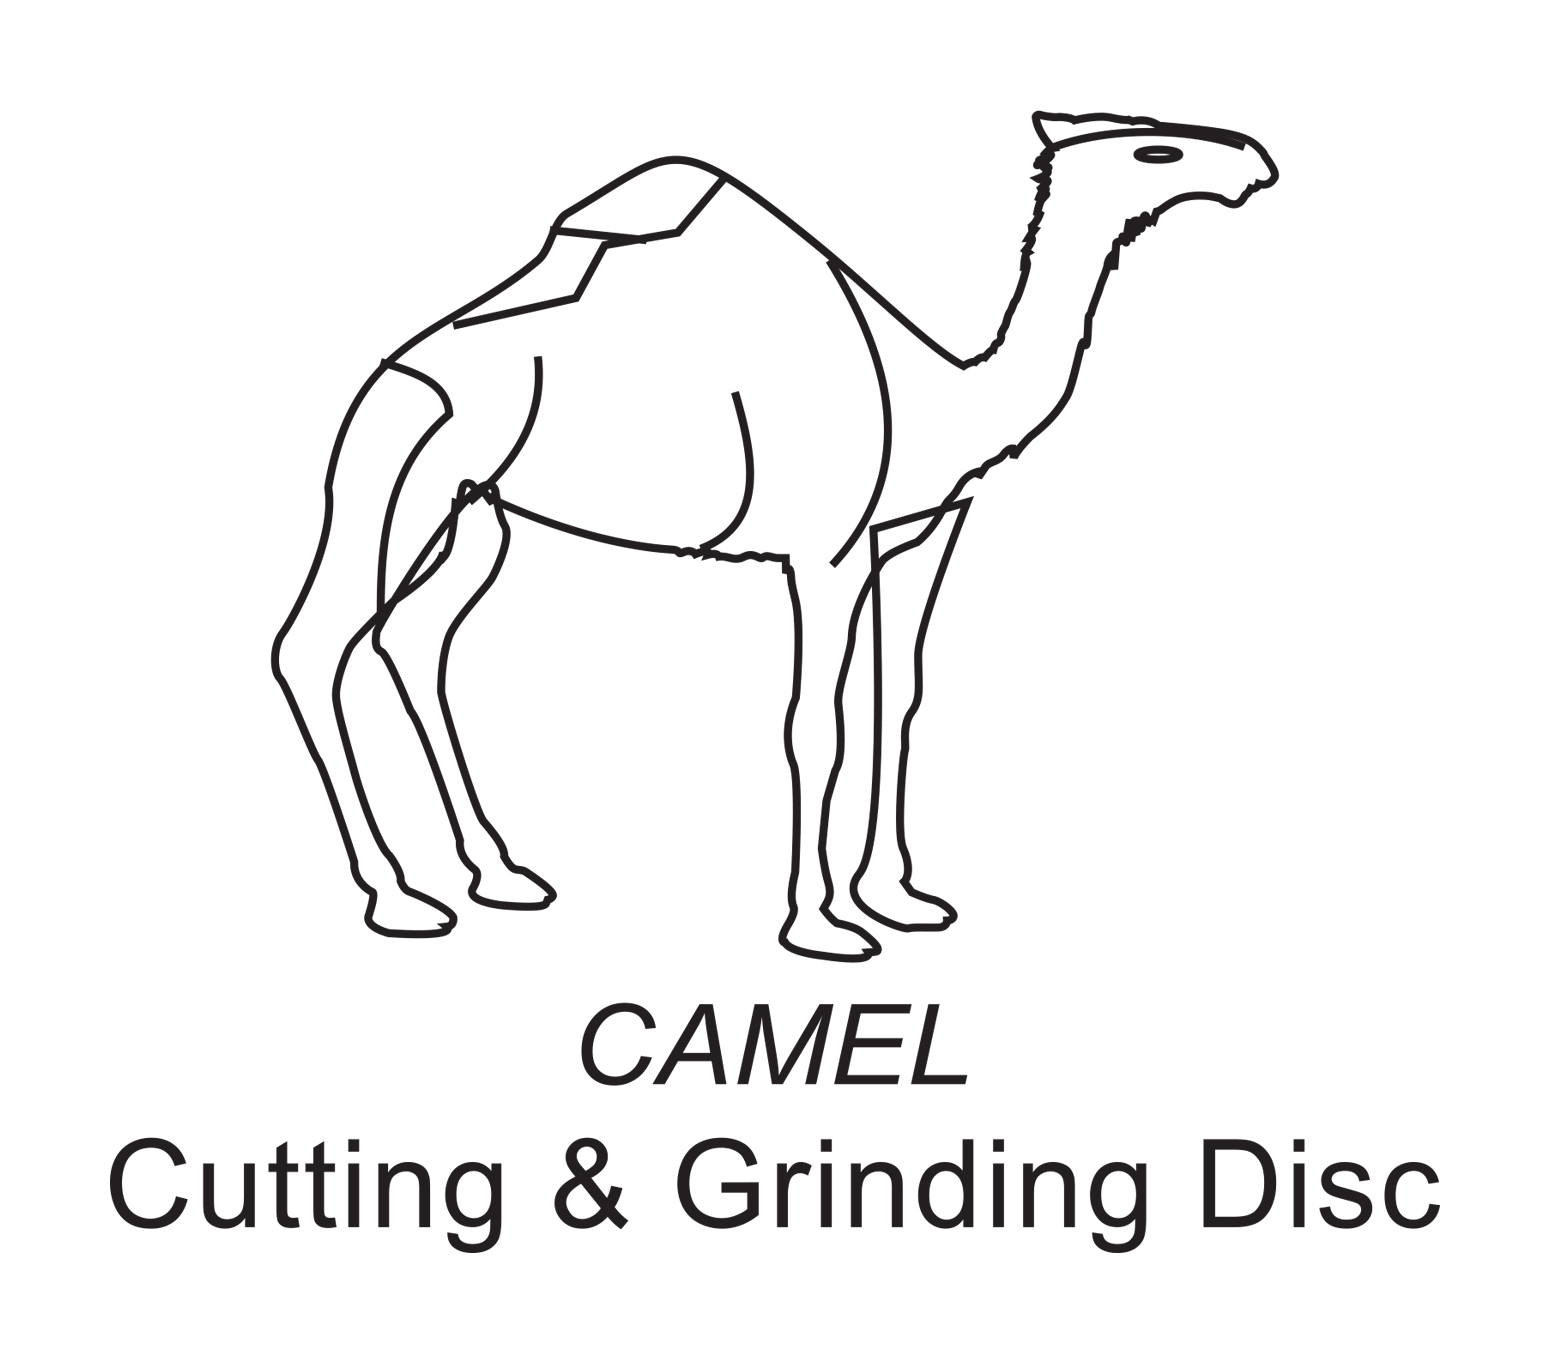 camel, cutting, grinding, discs, slovenia, swaty comet, weiler, abrasives, mild, stainless, steel